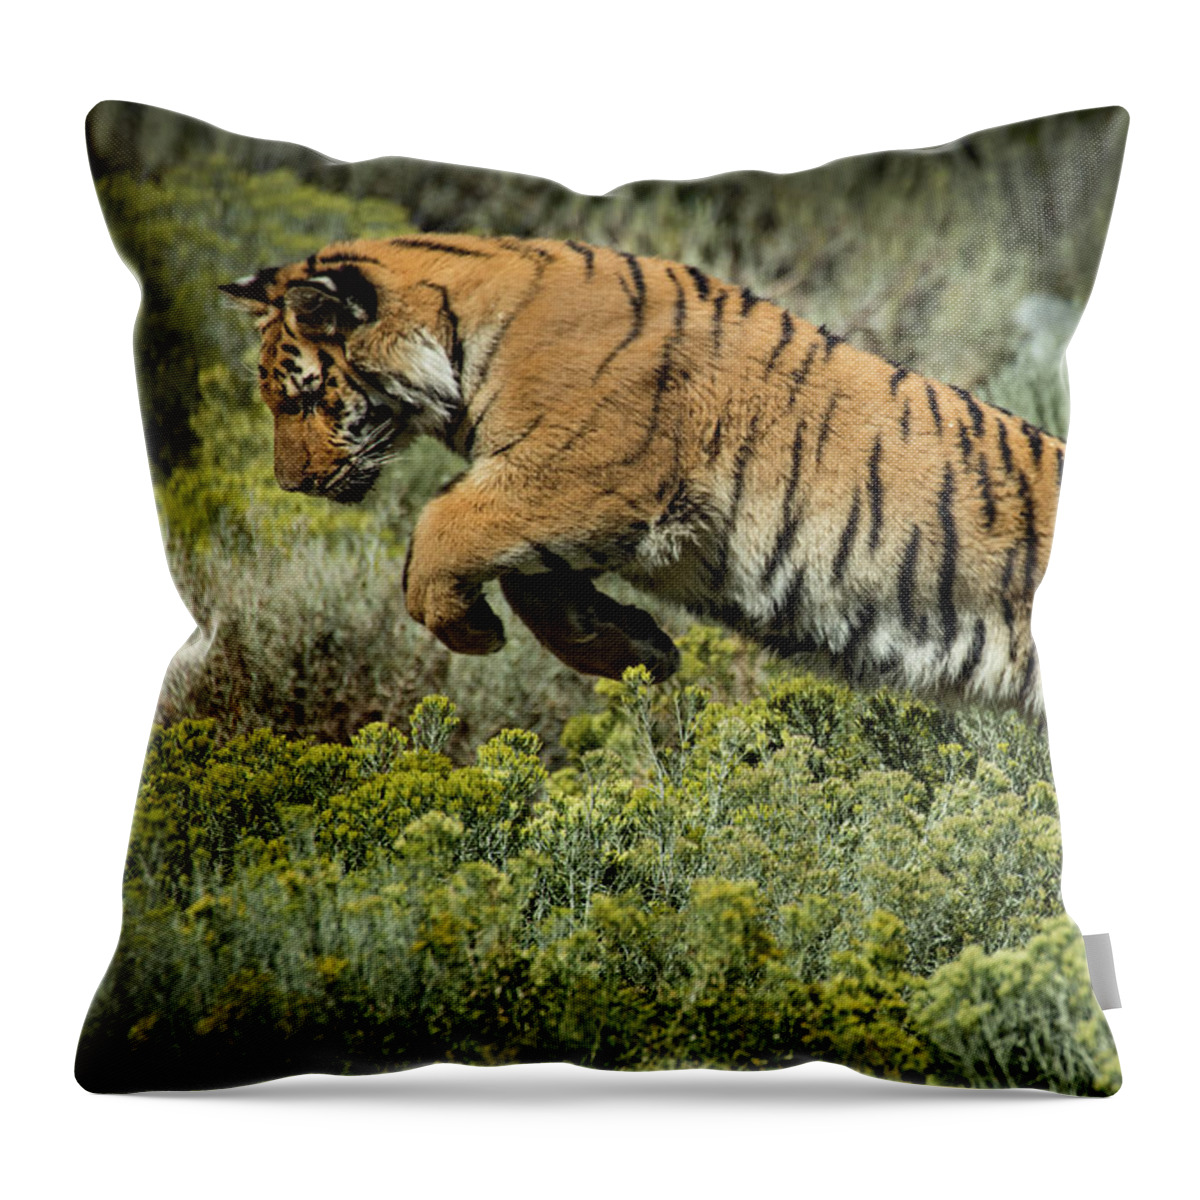 Tiger Throw Pillow featuring the photograph Tiger Lily Leeping by Janis Knight